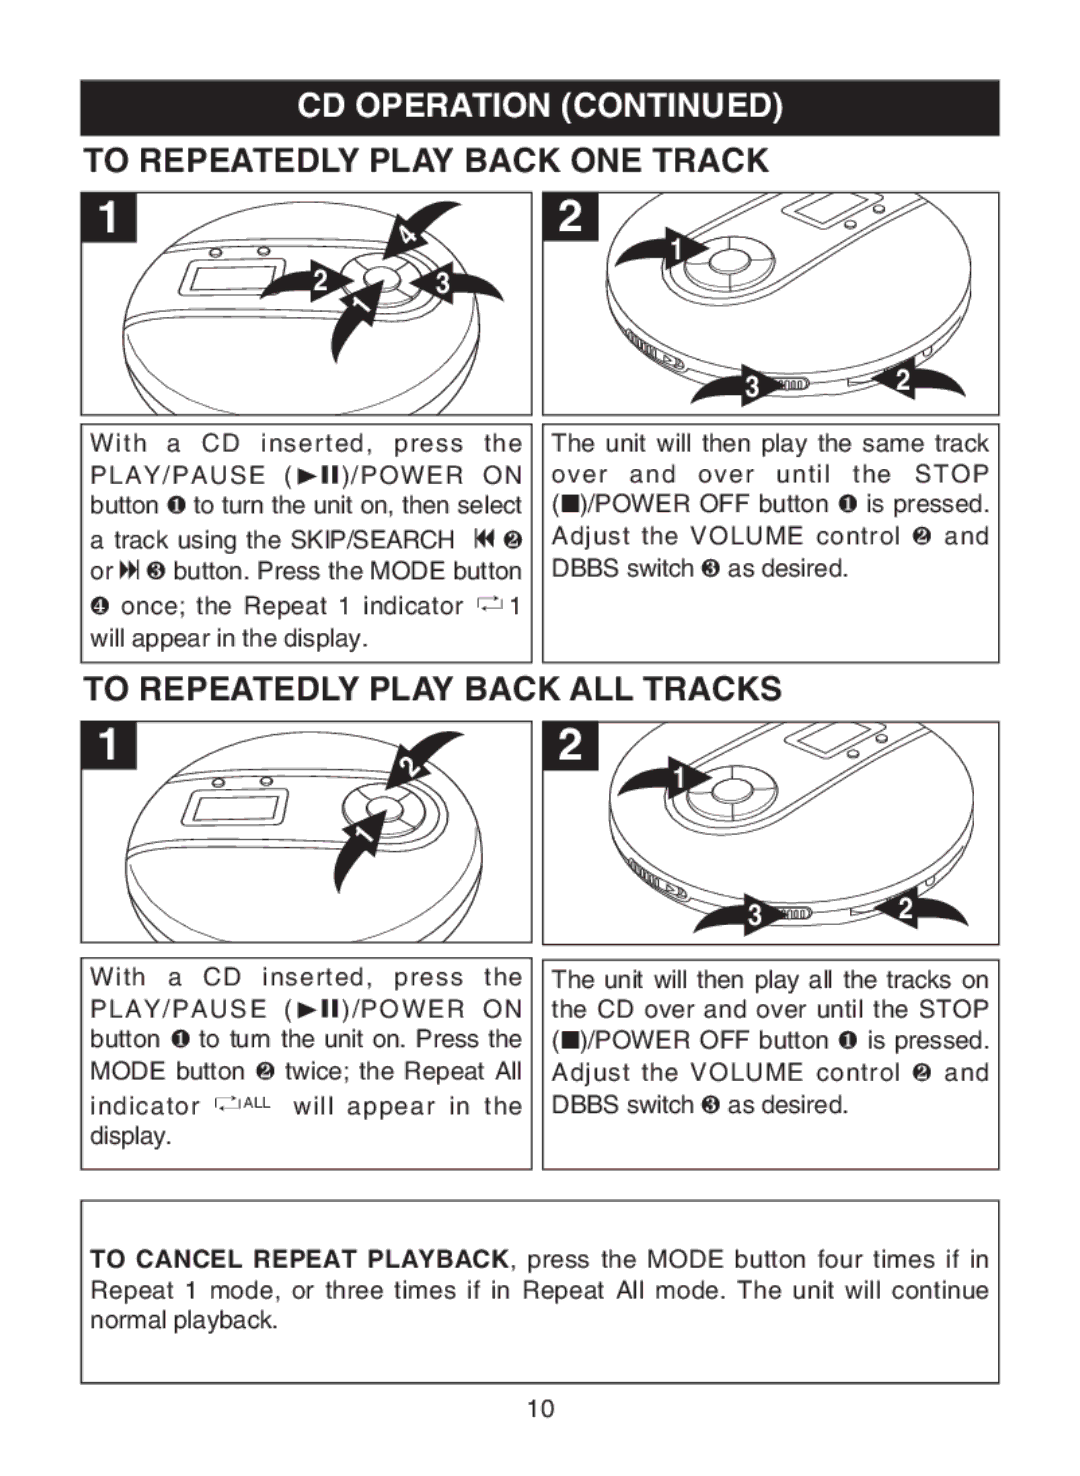 Memorex MD6443 manual To Repeatedly Play Back ONE Track, To Repeatedly Play Back ALL Tracks 